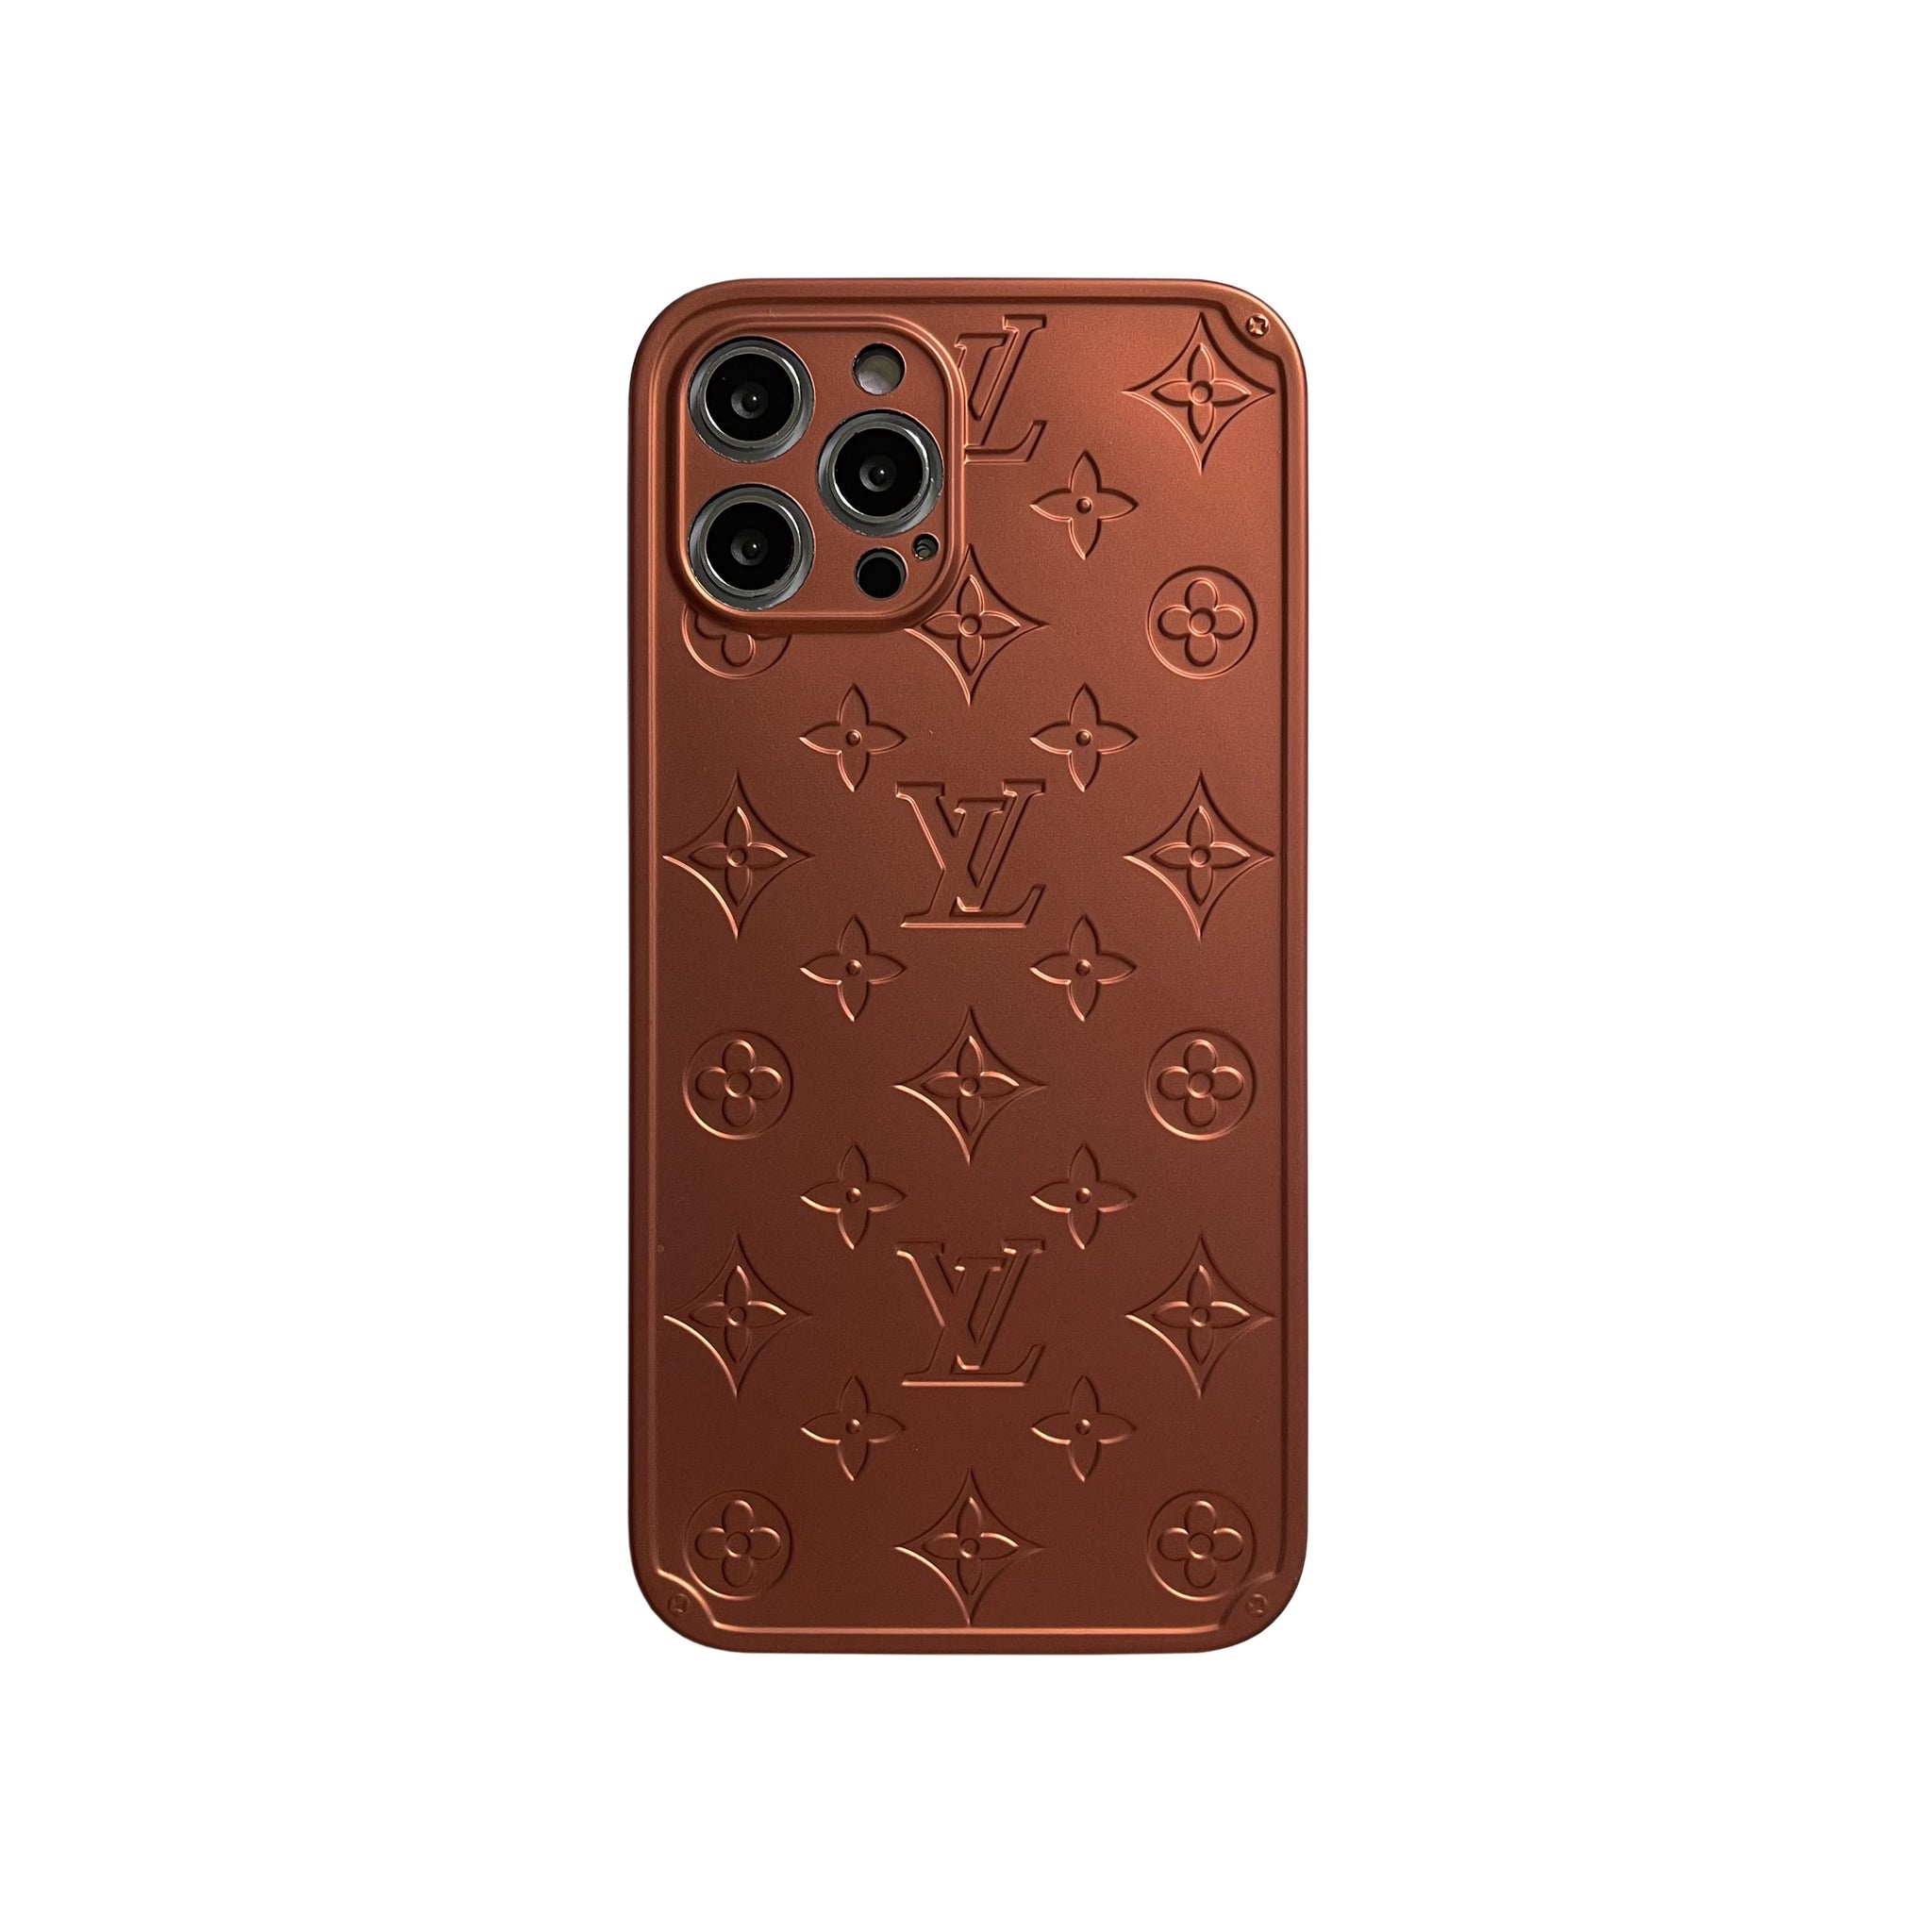 LOUIS VUITTON PATTERN LV LOGO ICON GOLD iPhone XS Max Case Cover